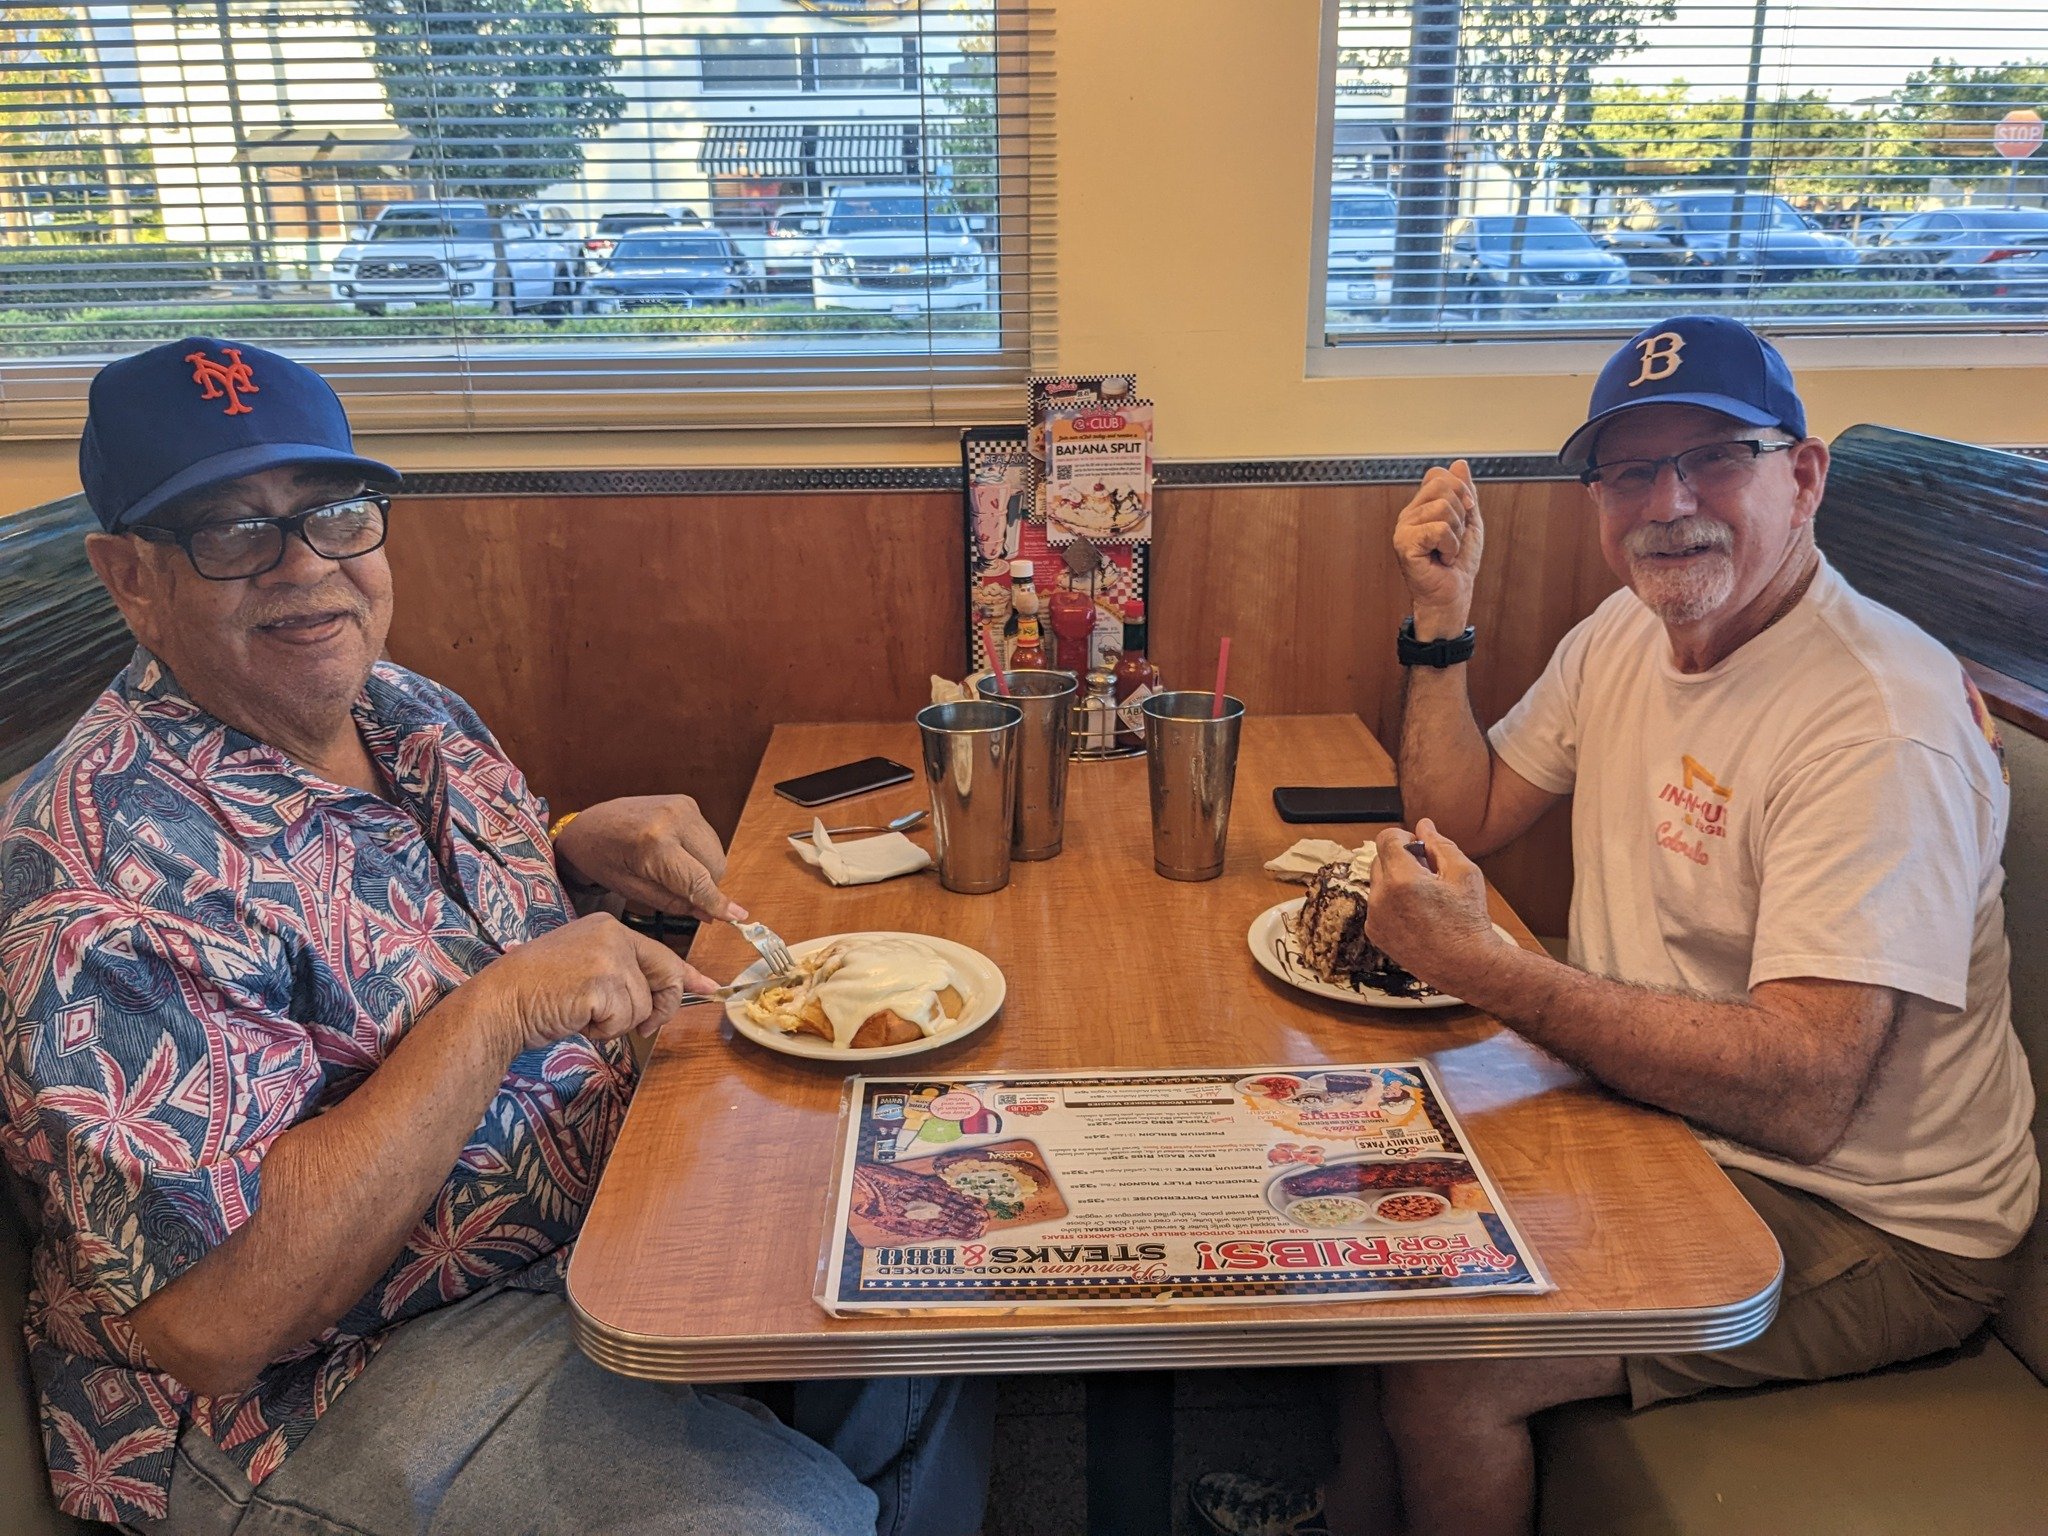 Richie&rsquo;s Diner Rancho Cucamonga&rsquo;s Sunday Family Dinner Tradition is worth sharing, whether it&rsquo;s dinner for two or the whole crowd is gathering. Make some time to enjoy those special people in your life.  You&rsquo;ll thank us later.